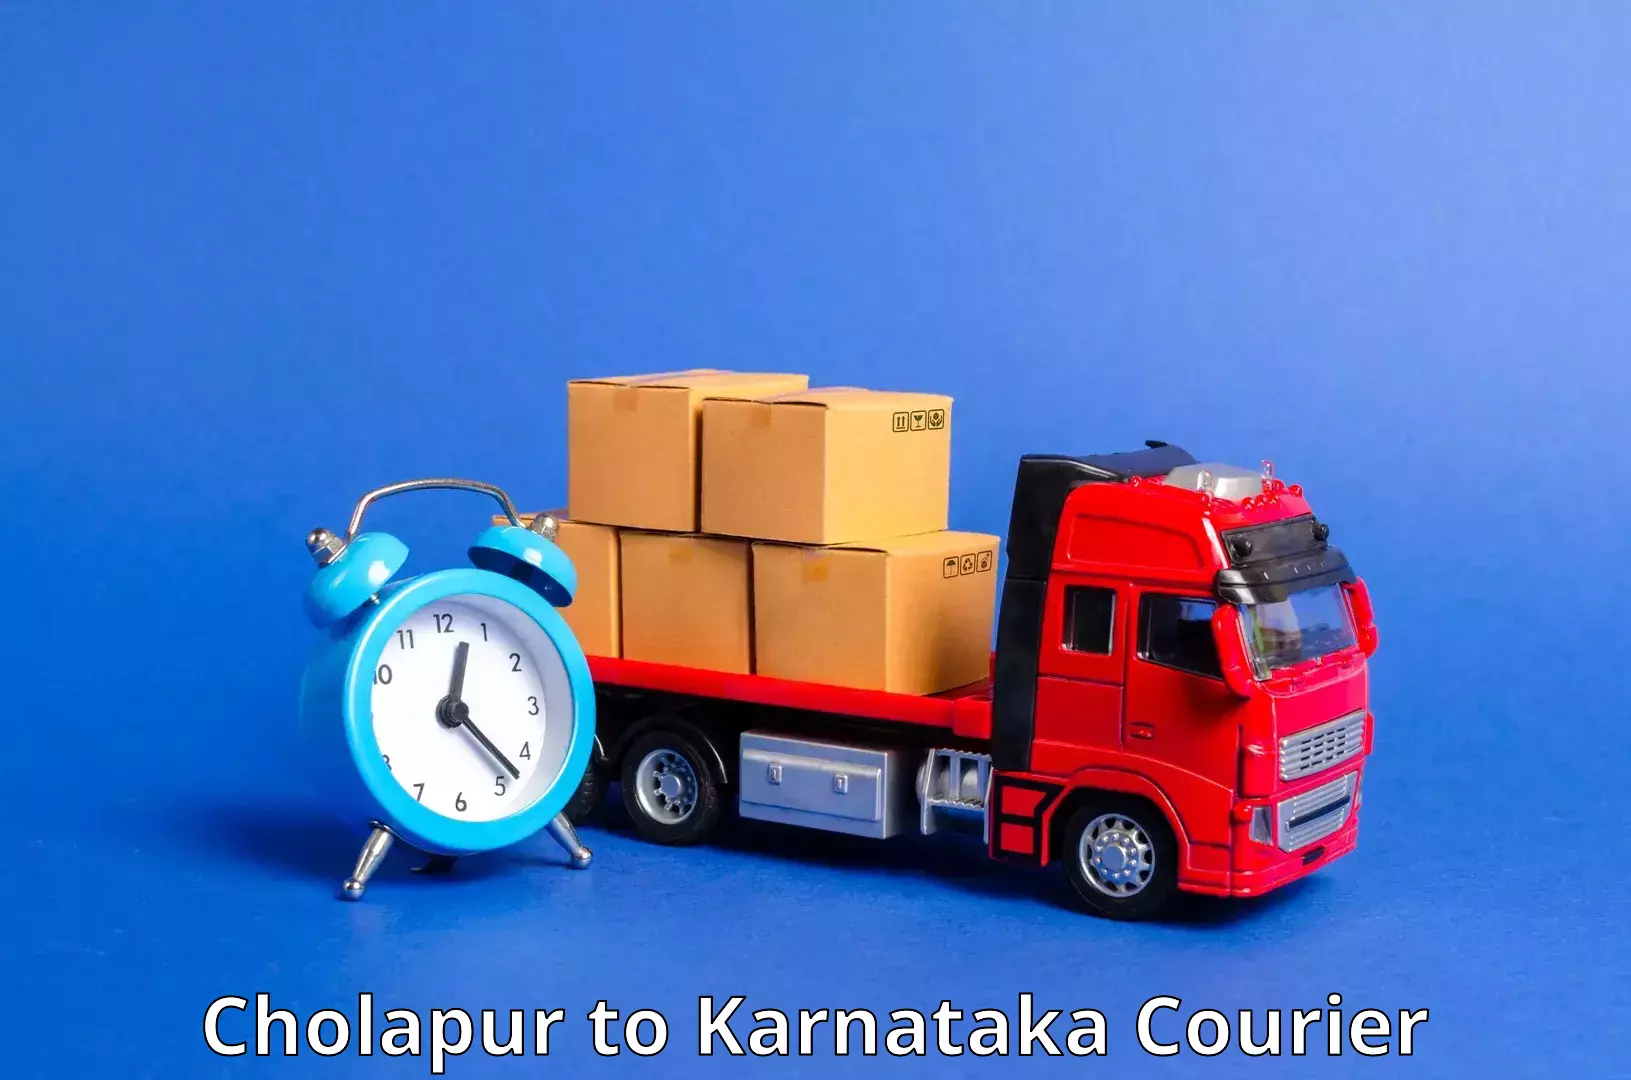 Next-day delivery options Cholapur to Yellapur